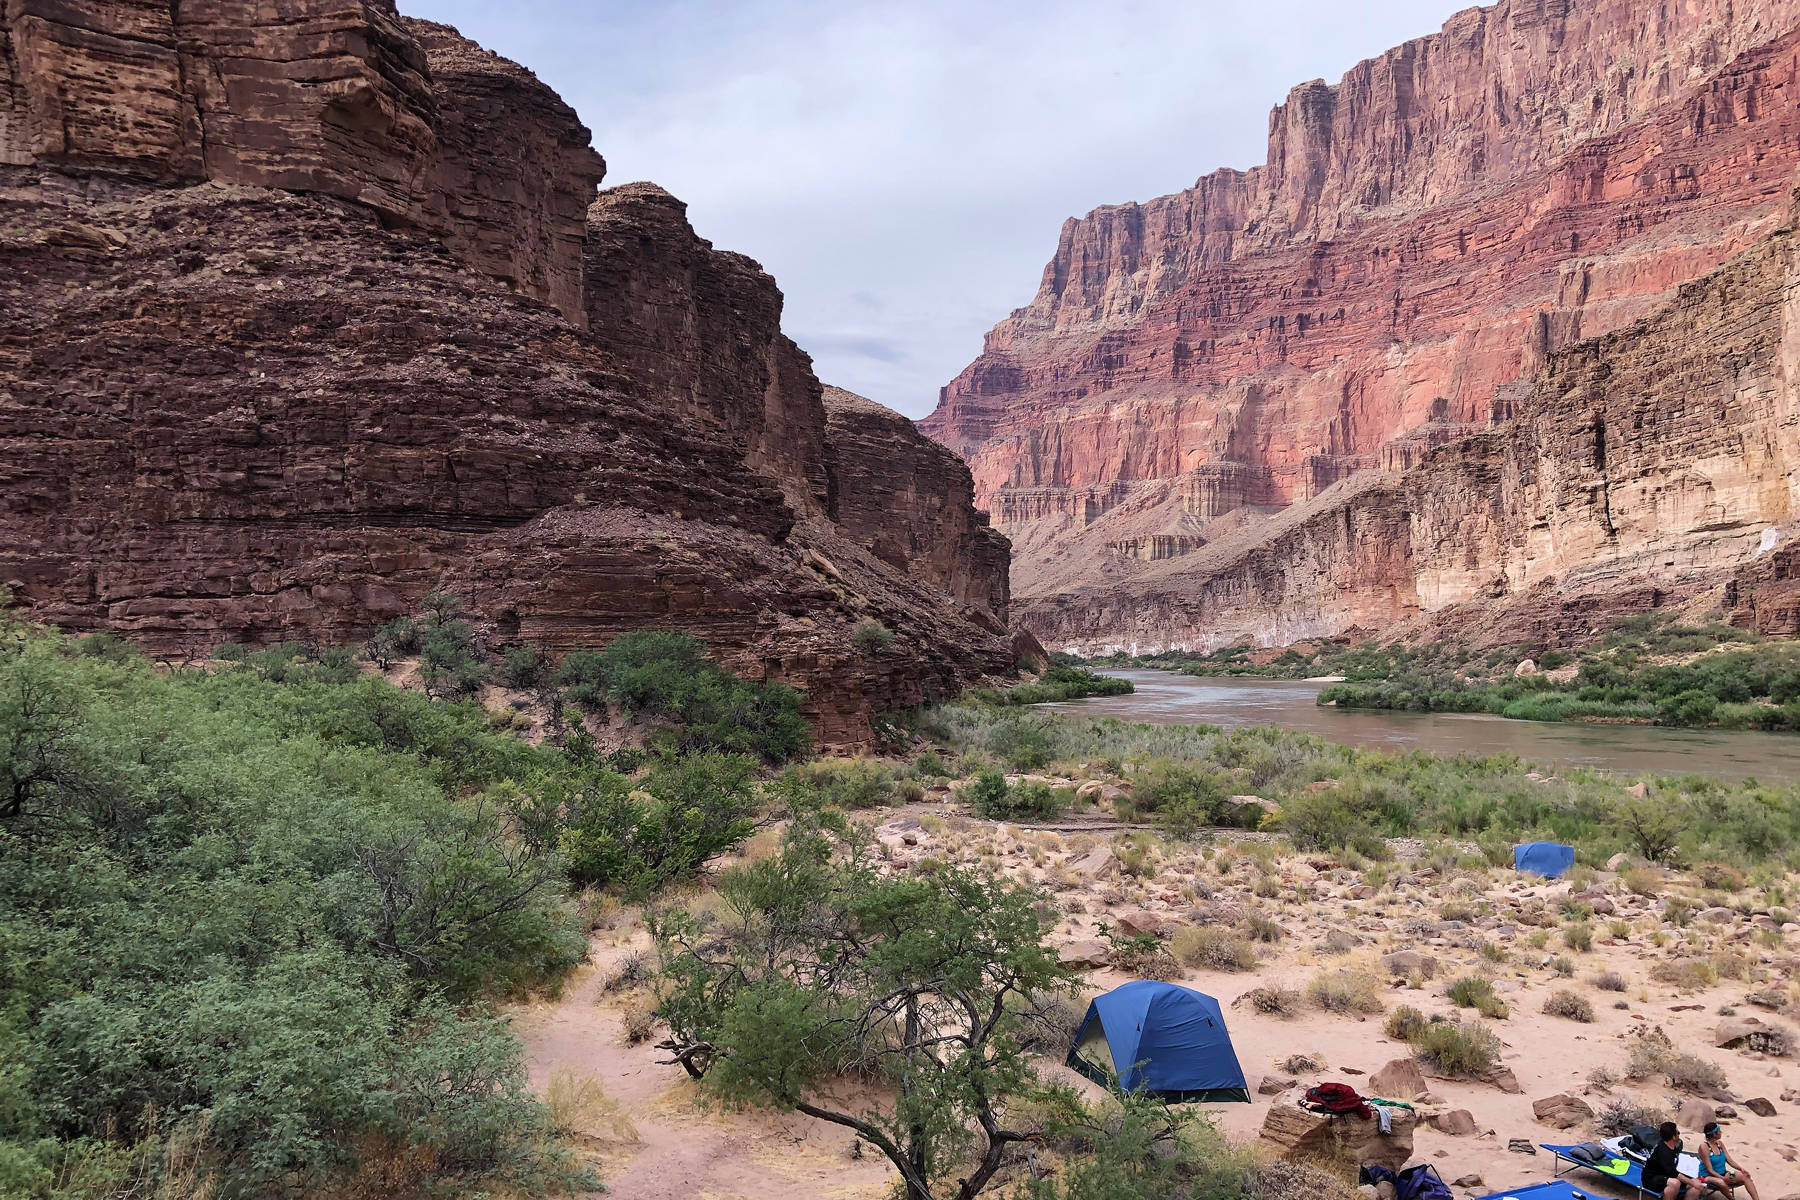 The campsite at mile 65 of the Grand Canyon trip on the Colorado River. (Photo by Joey Klecka/Peninsula Clarion)